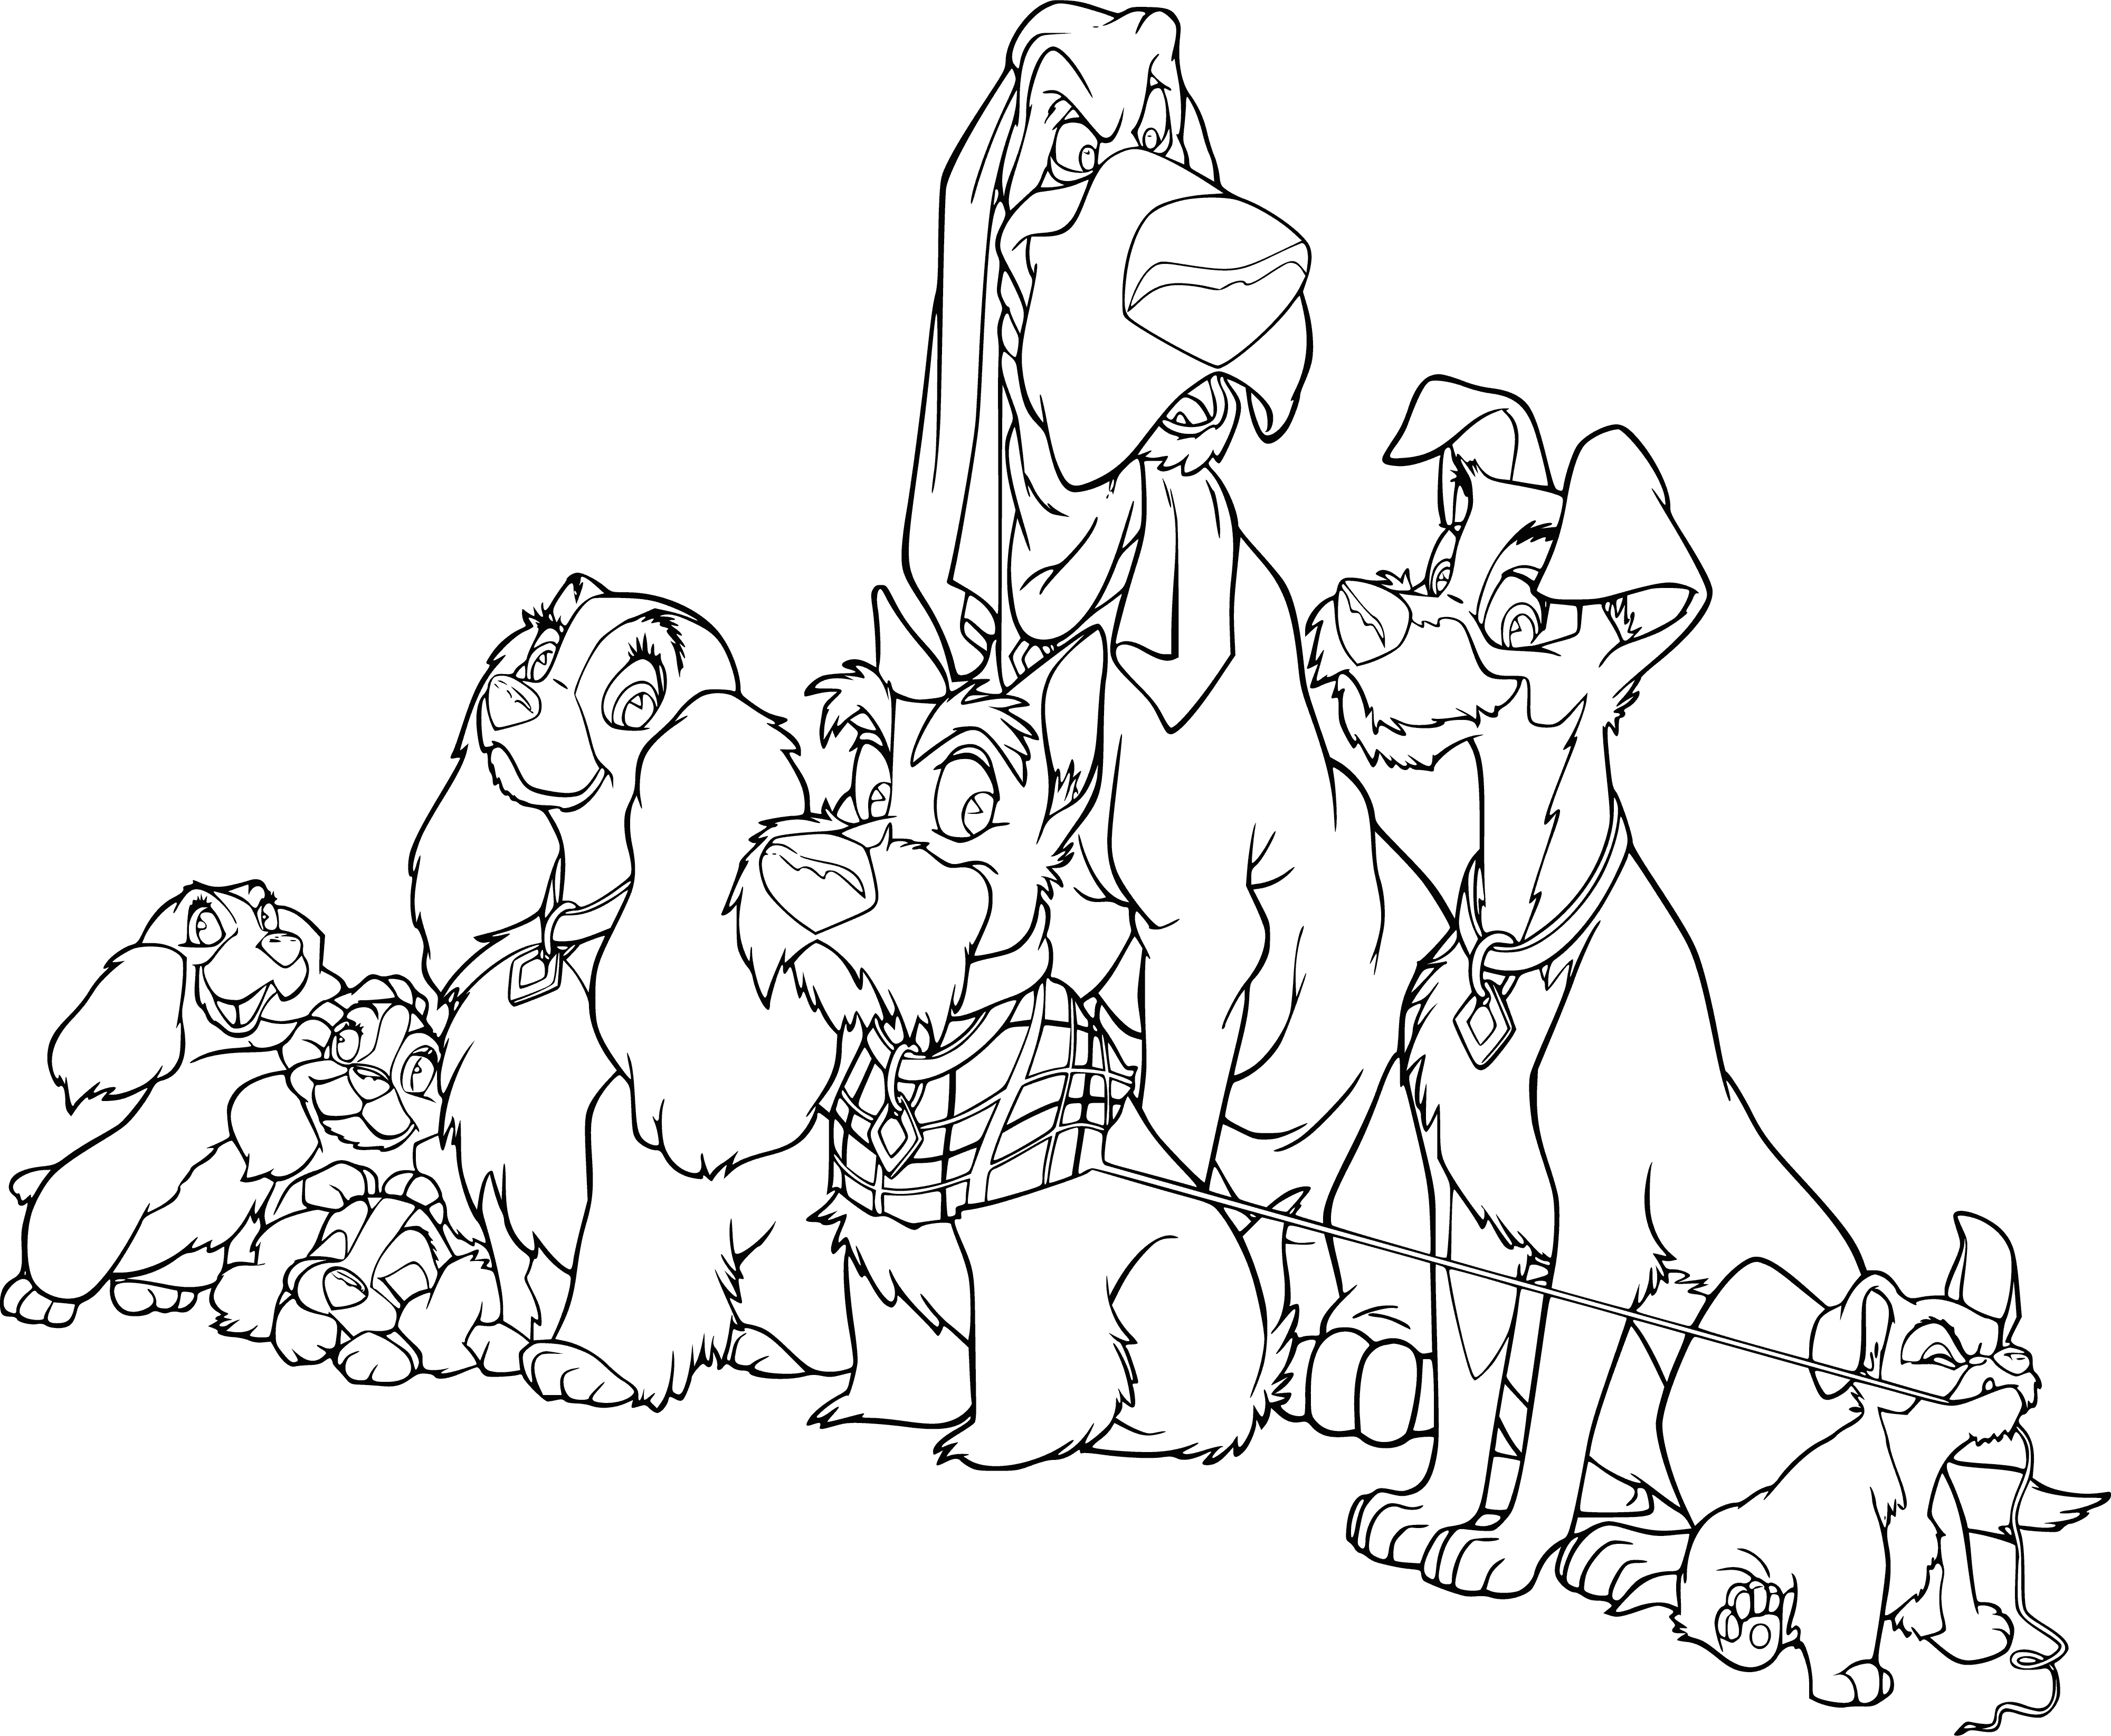 coloring page: Everyone watching Lady & Tramp happily, looking content & at ease - it's clear they're all good friends. #bonding